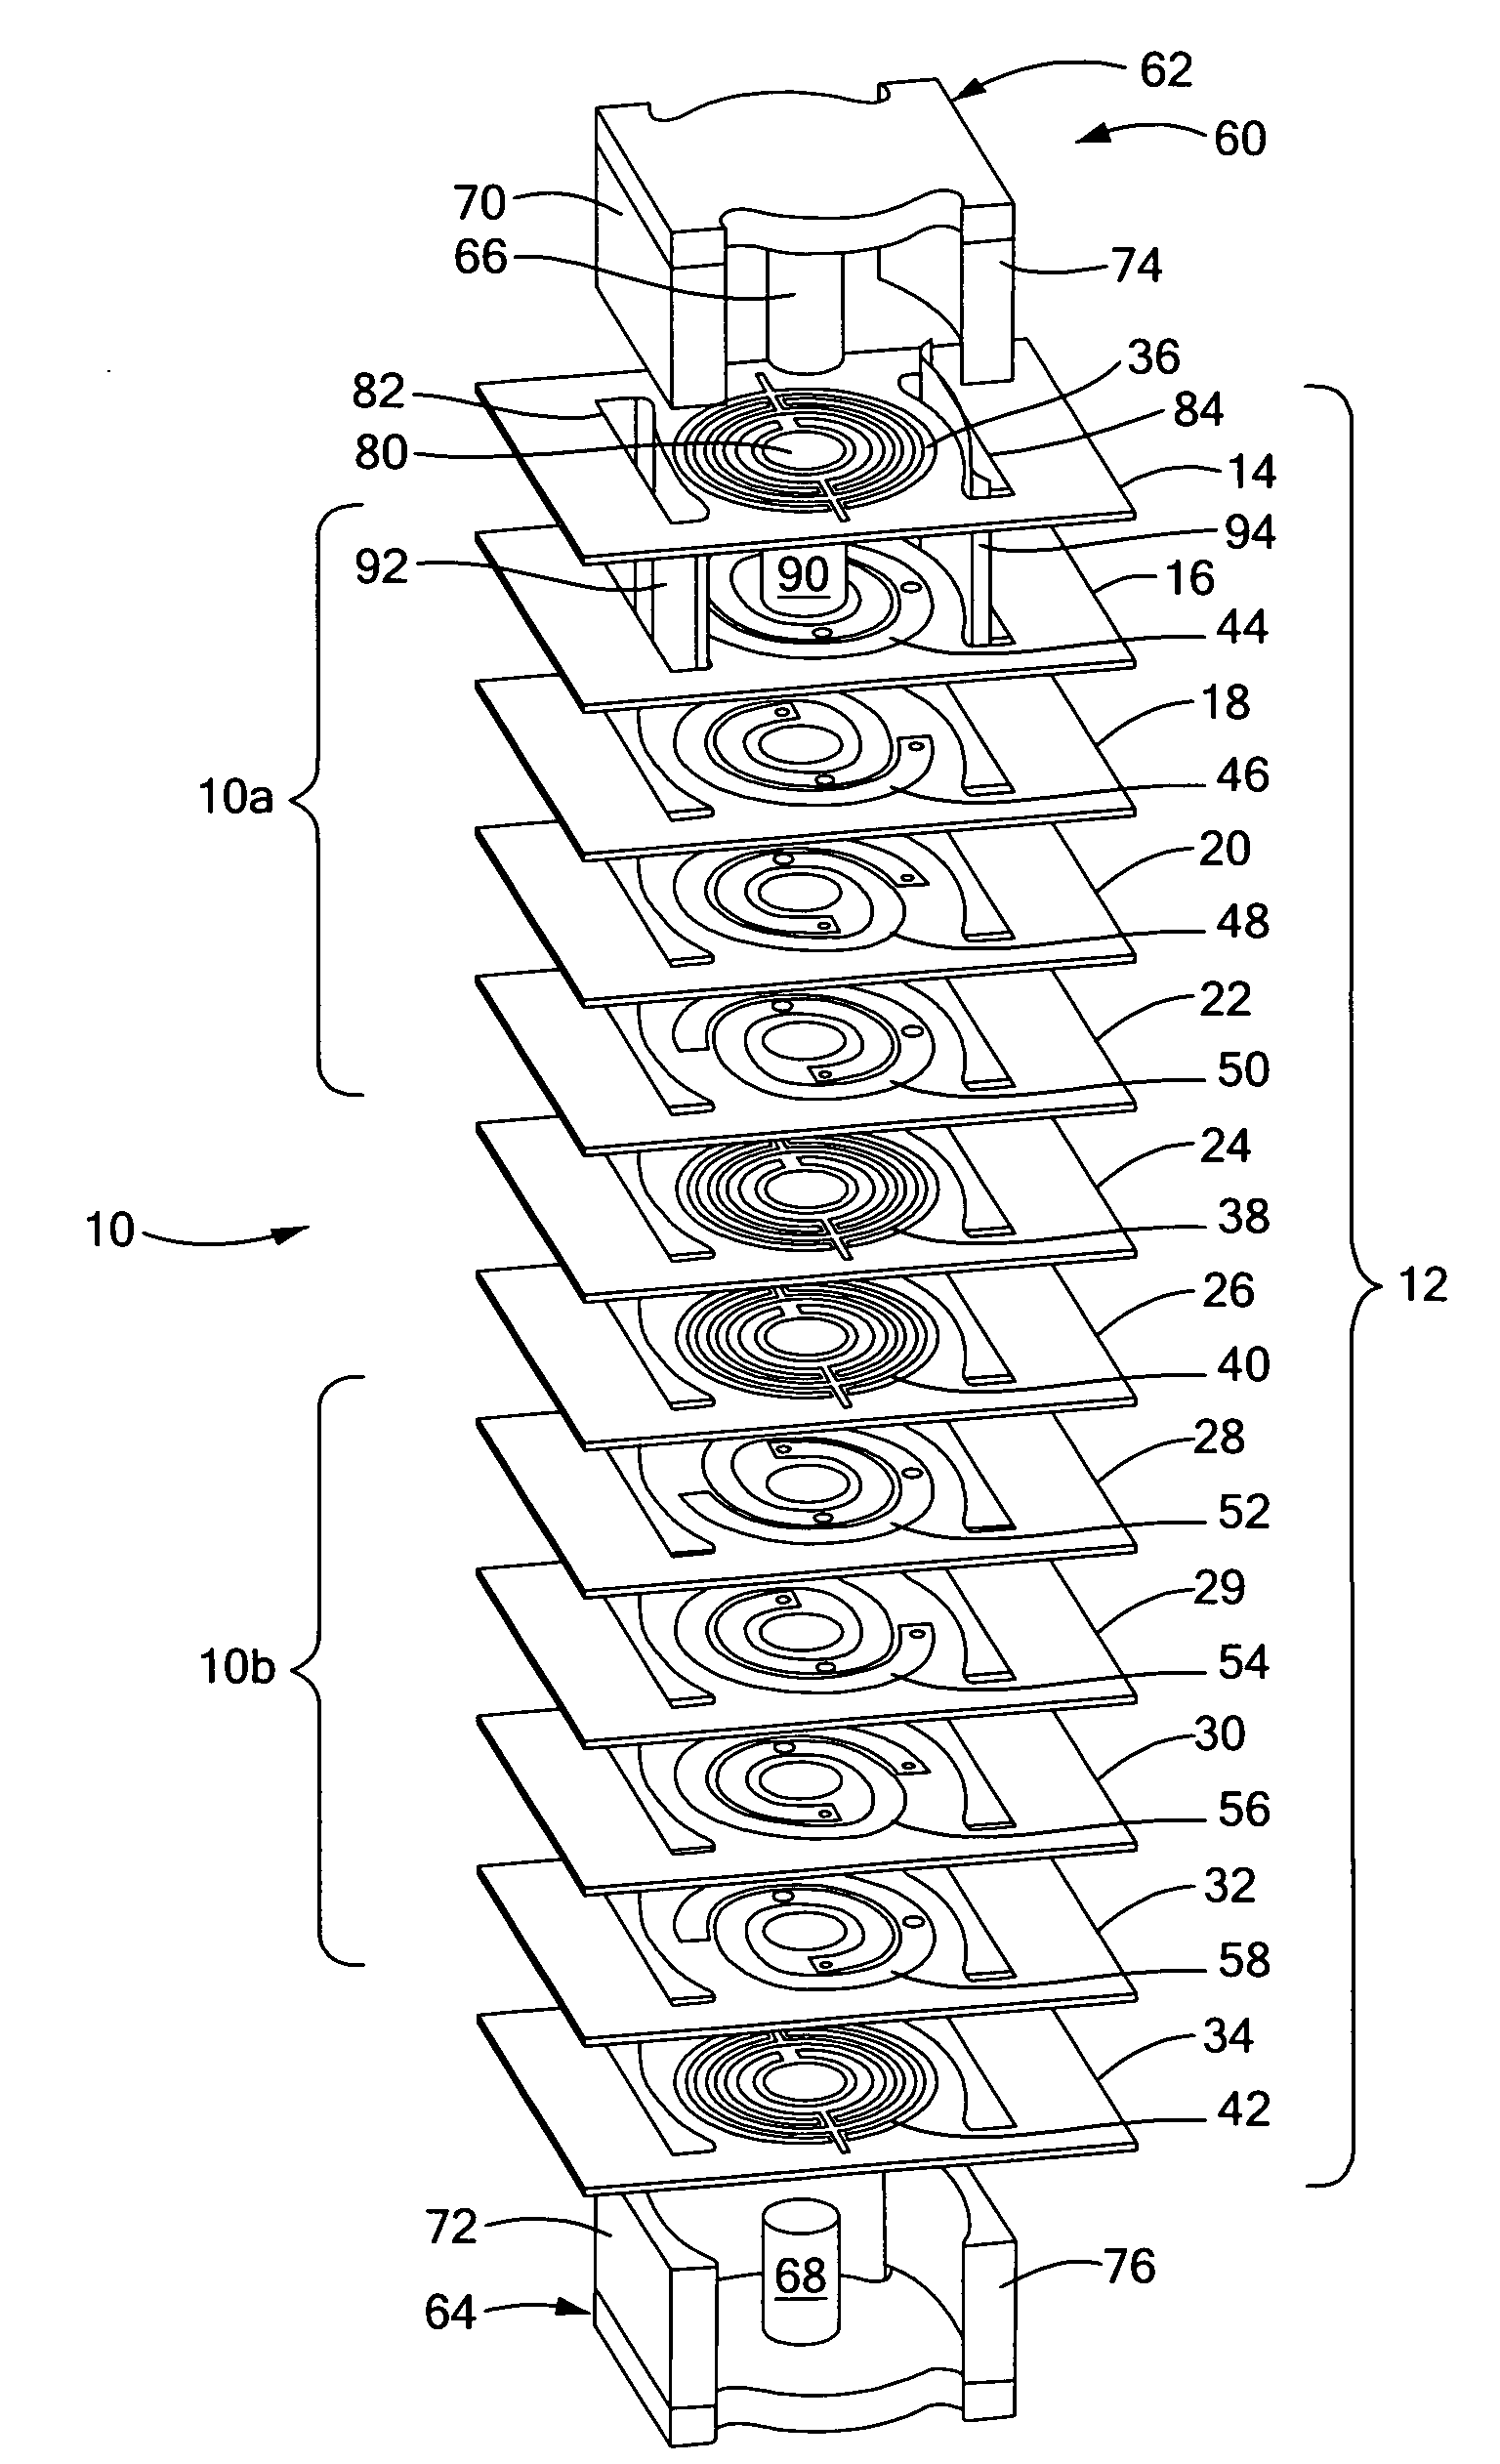 Planar magnetic structure